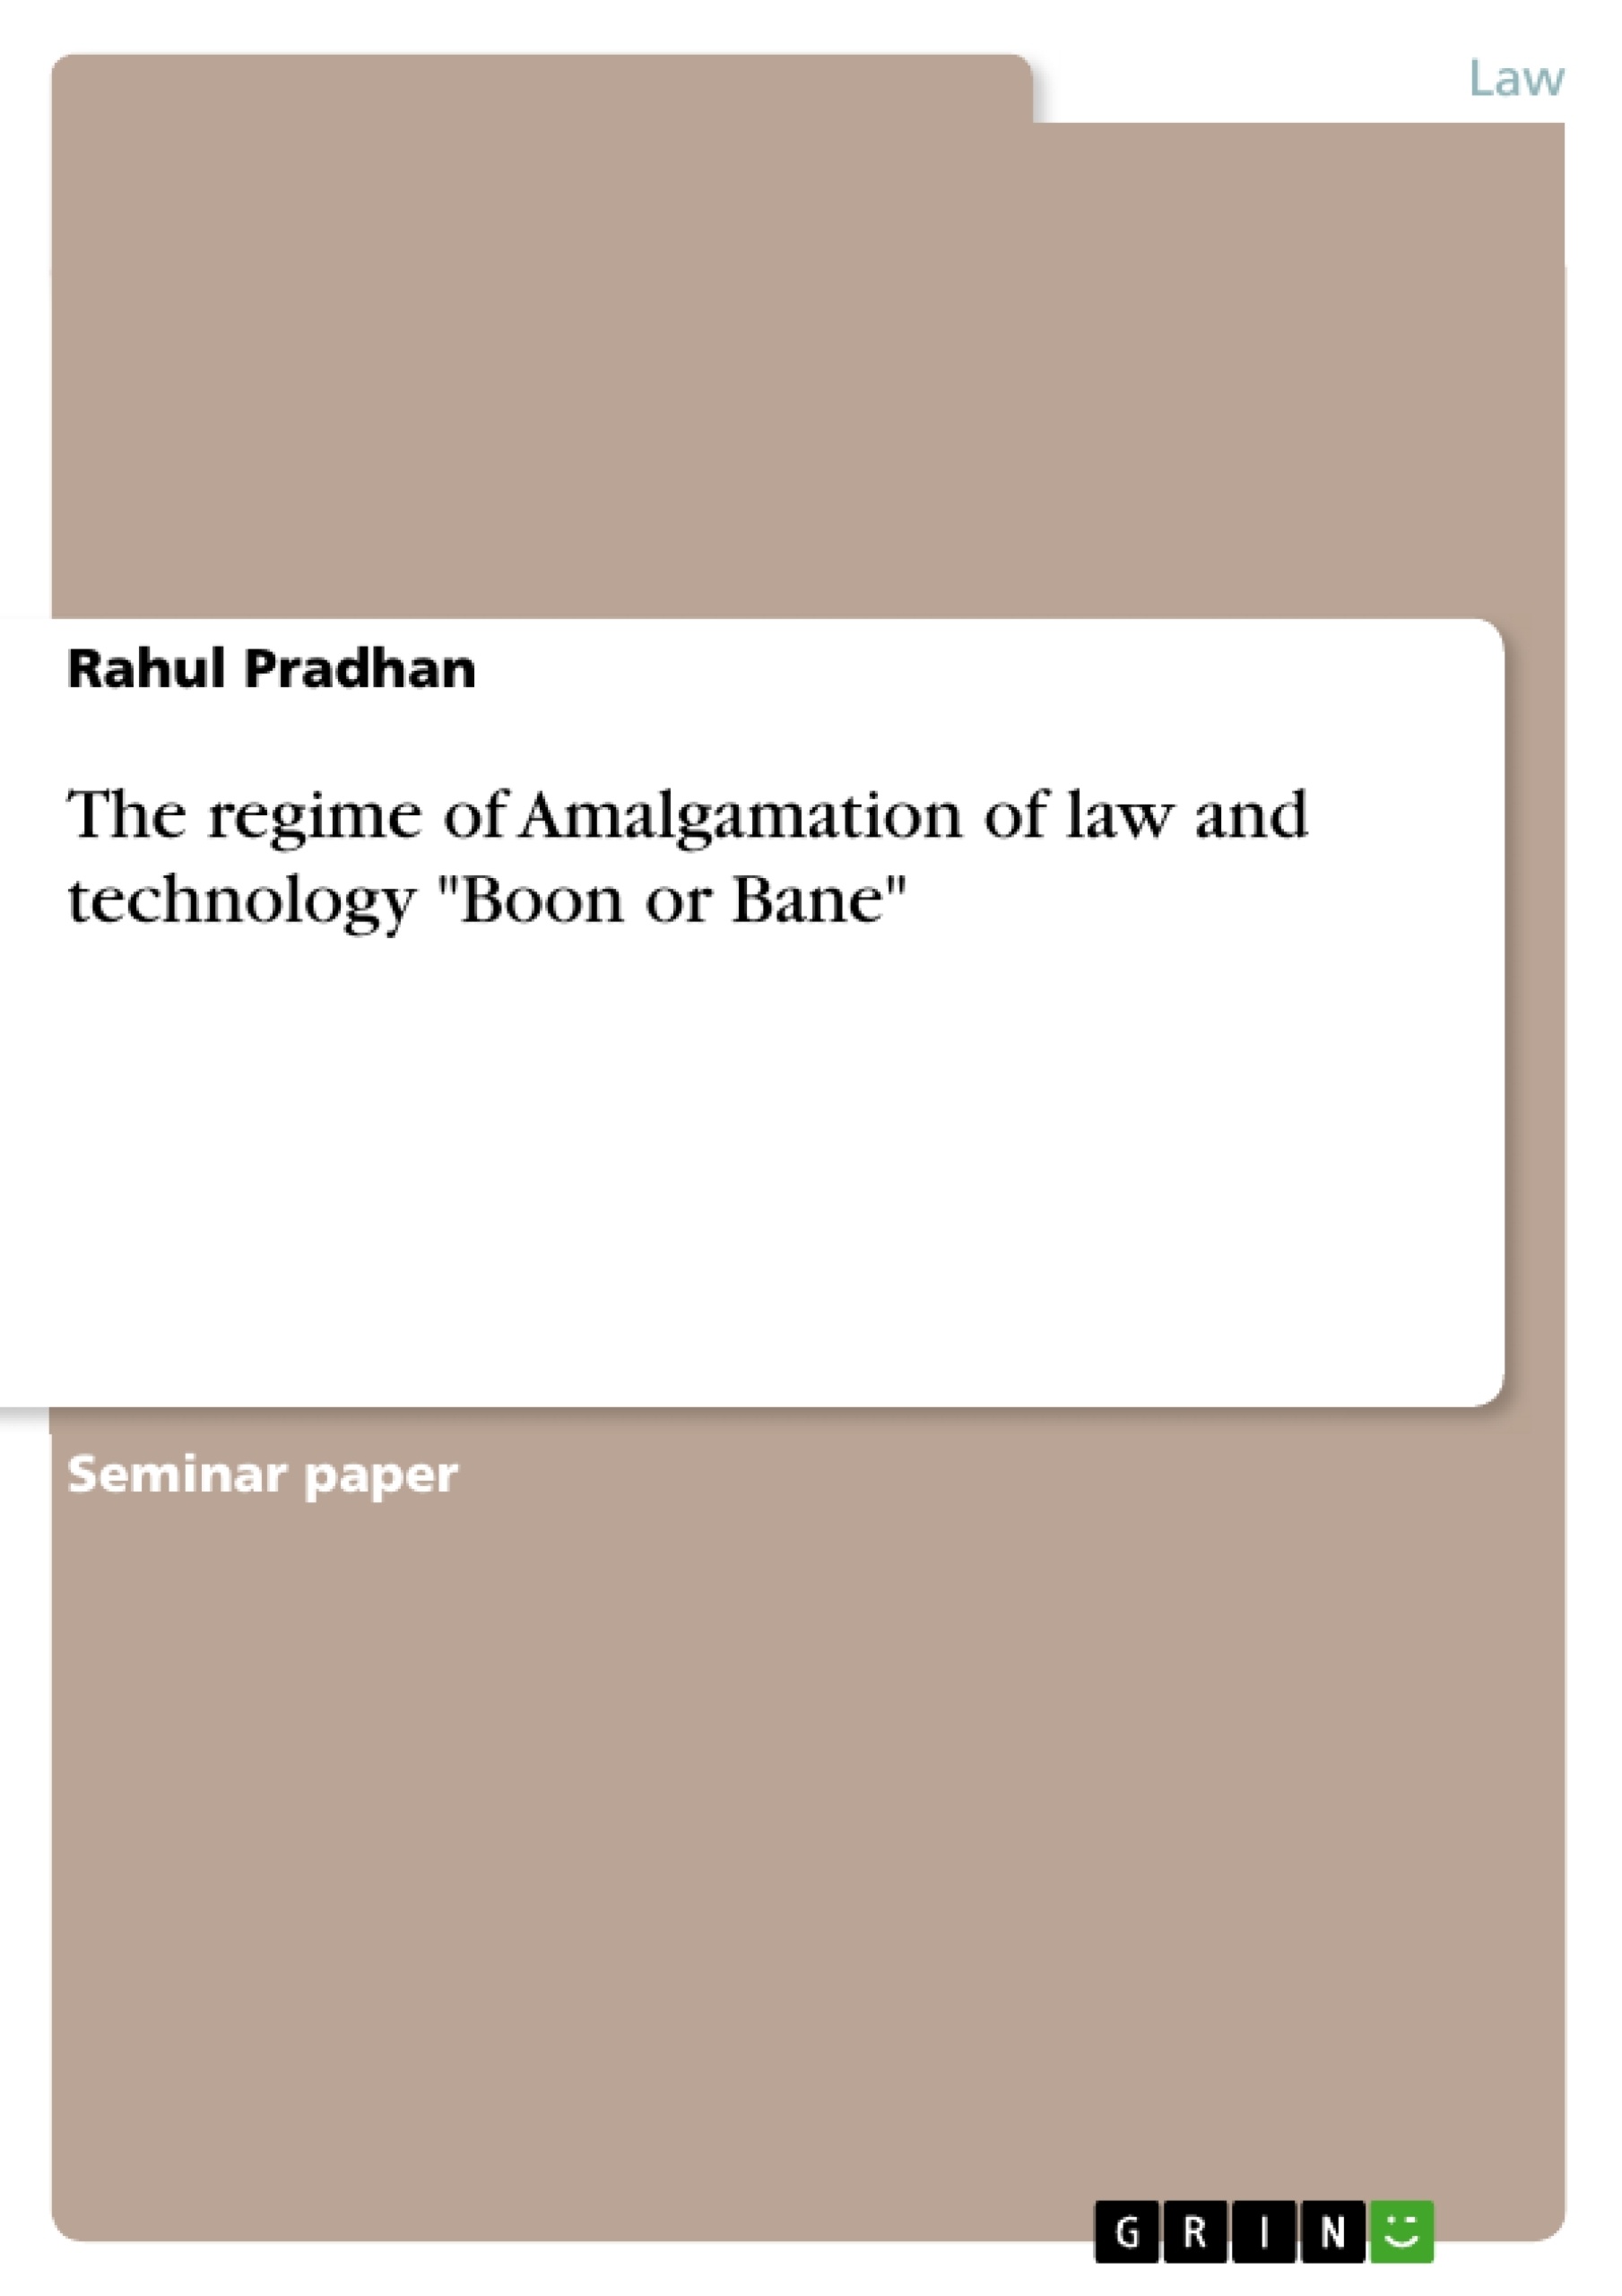 Titre: The regime of Amalgamation of law and technology "Boon or Bane"